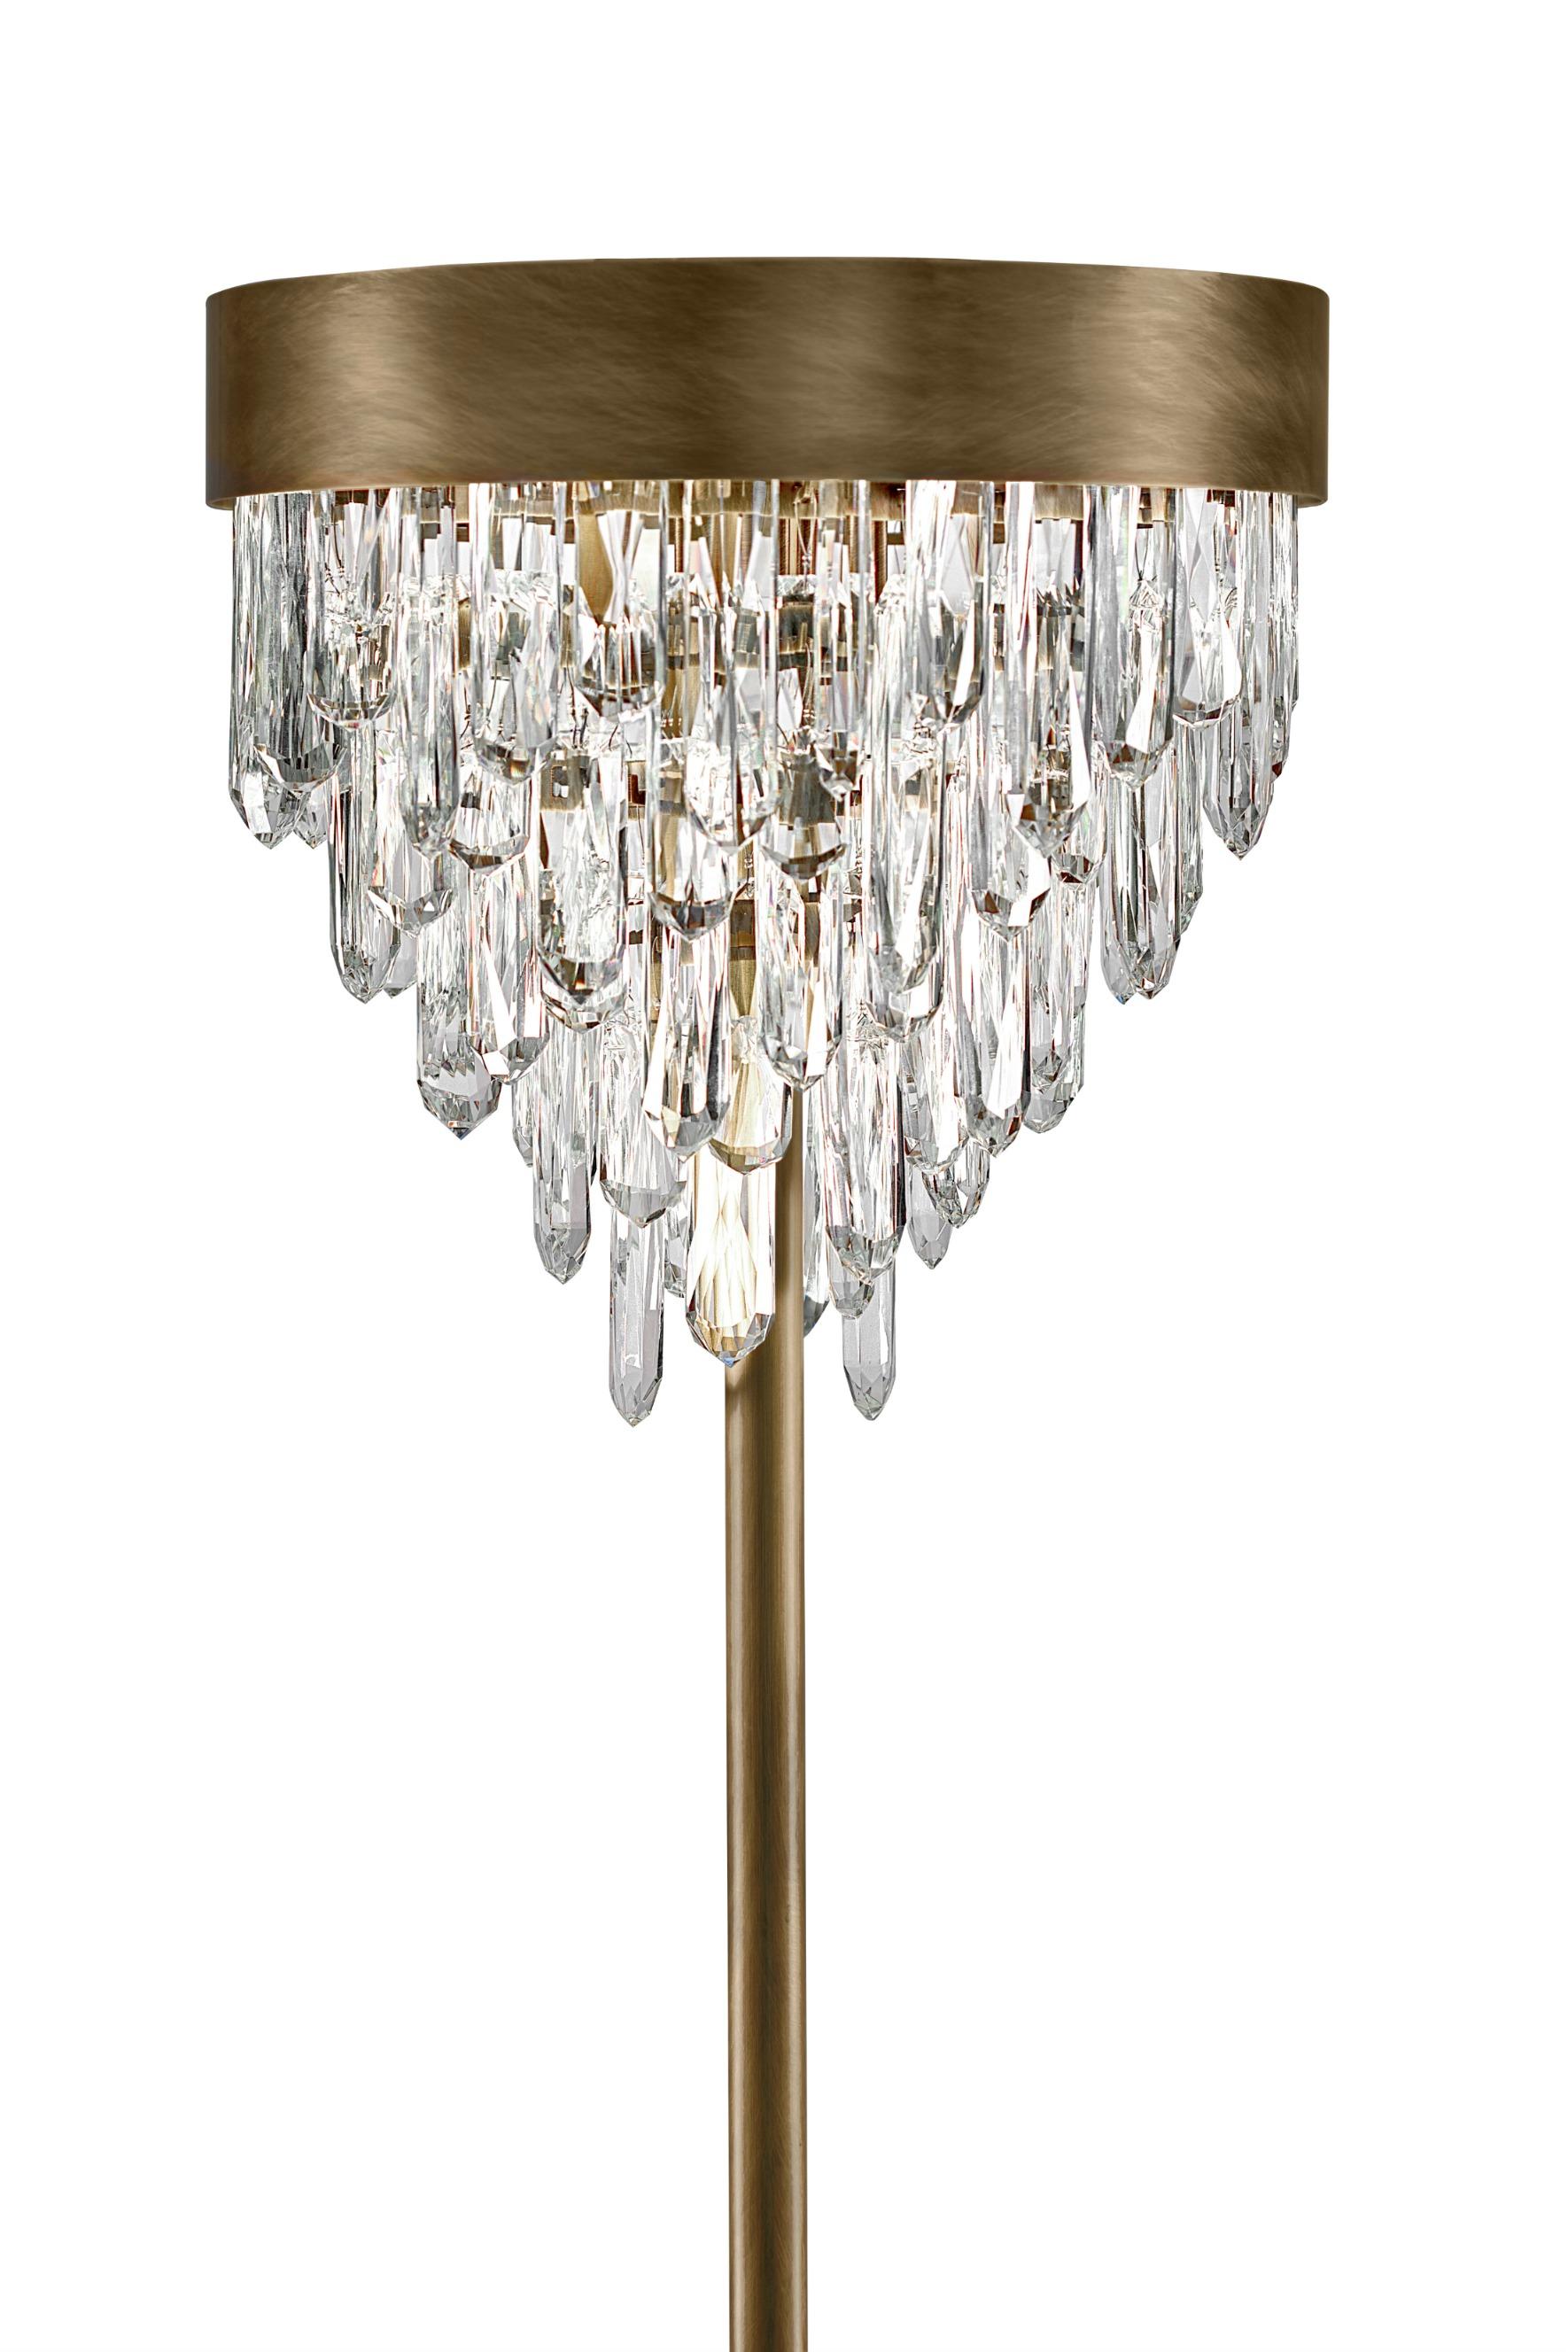 Portuguese Naicca Floor Lamp in Brushed Brass and Quartz by BRABBU For Sale